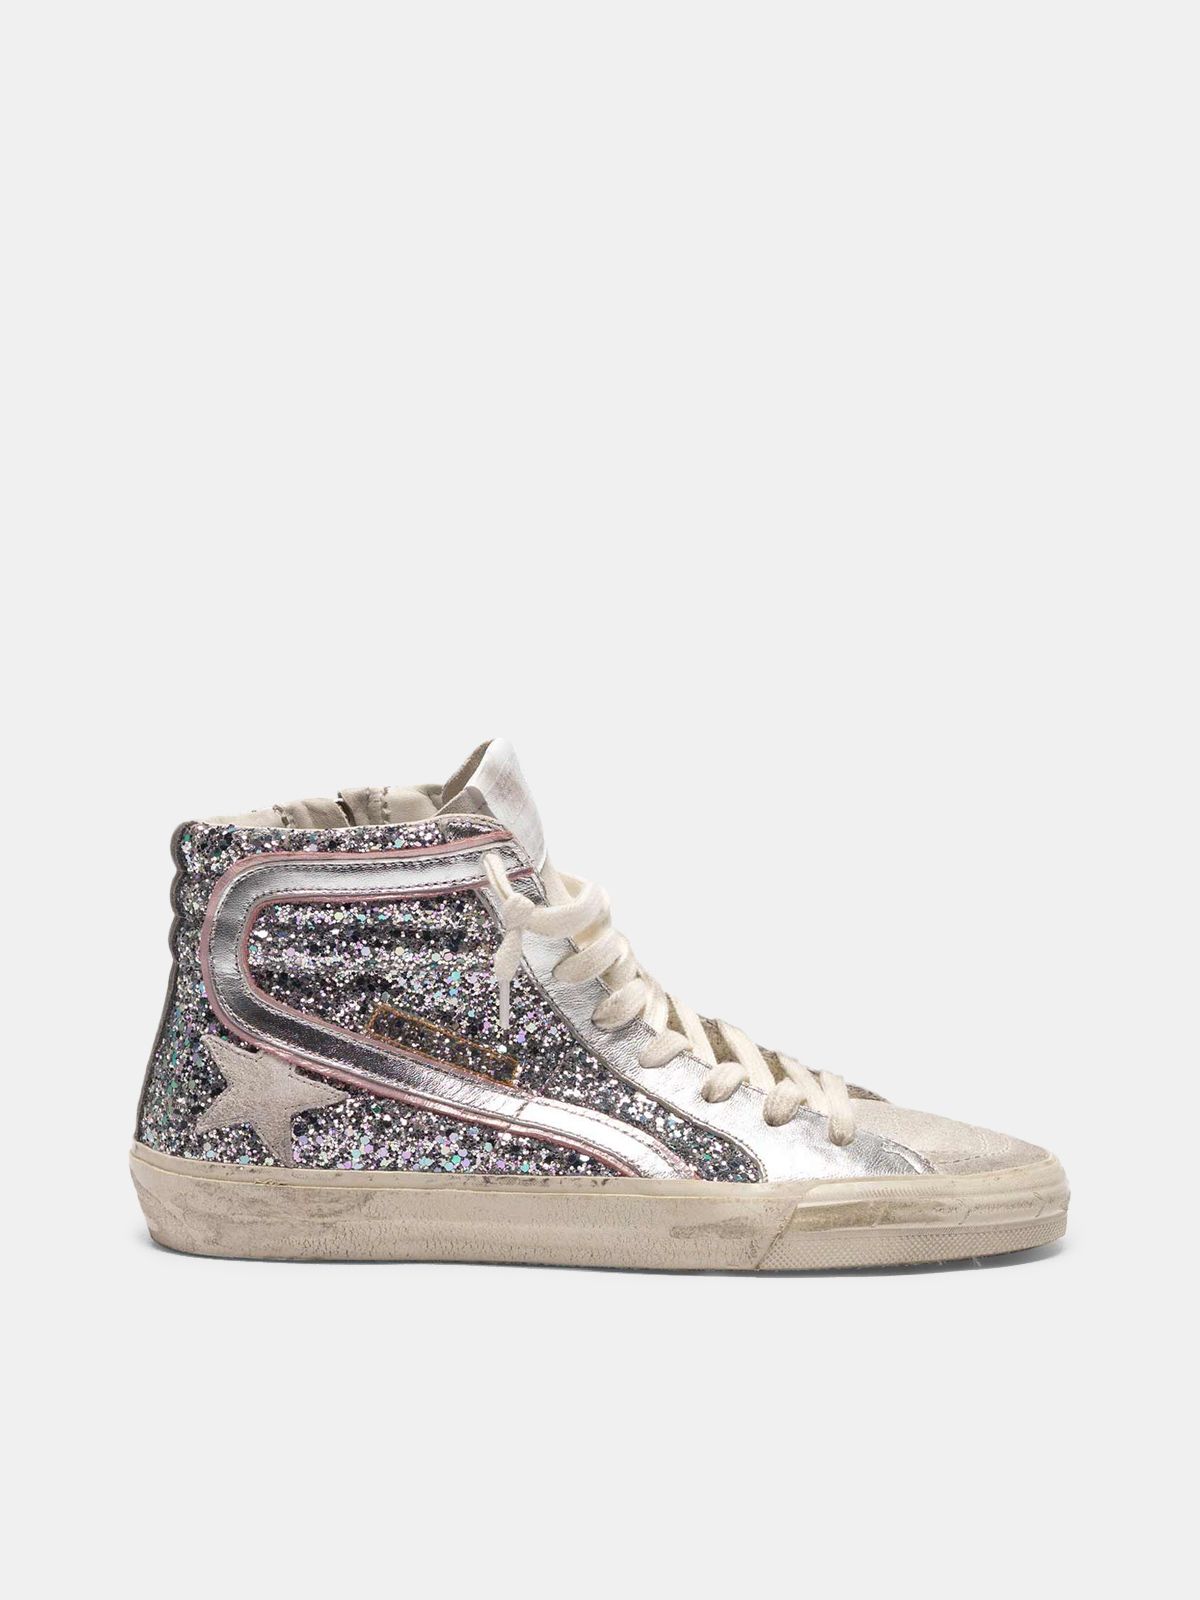 golden goose laminated in silver and glitter sneakers Slide leather